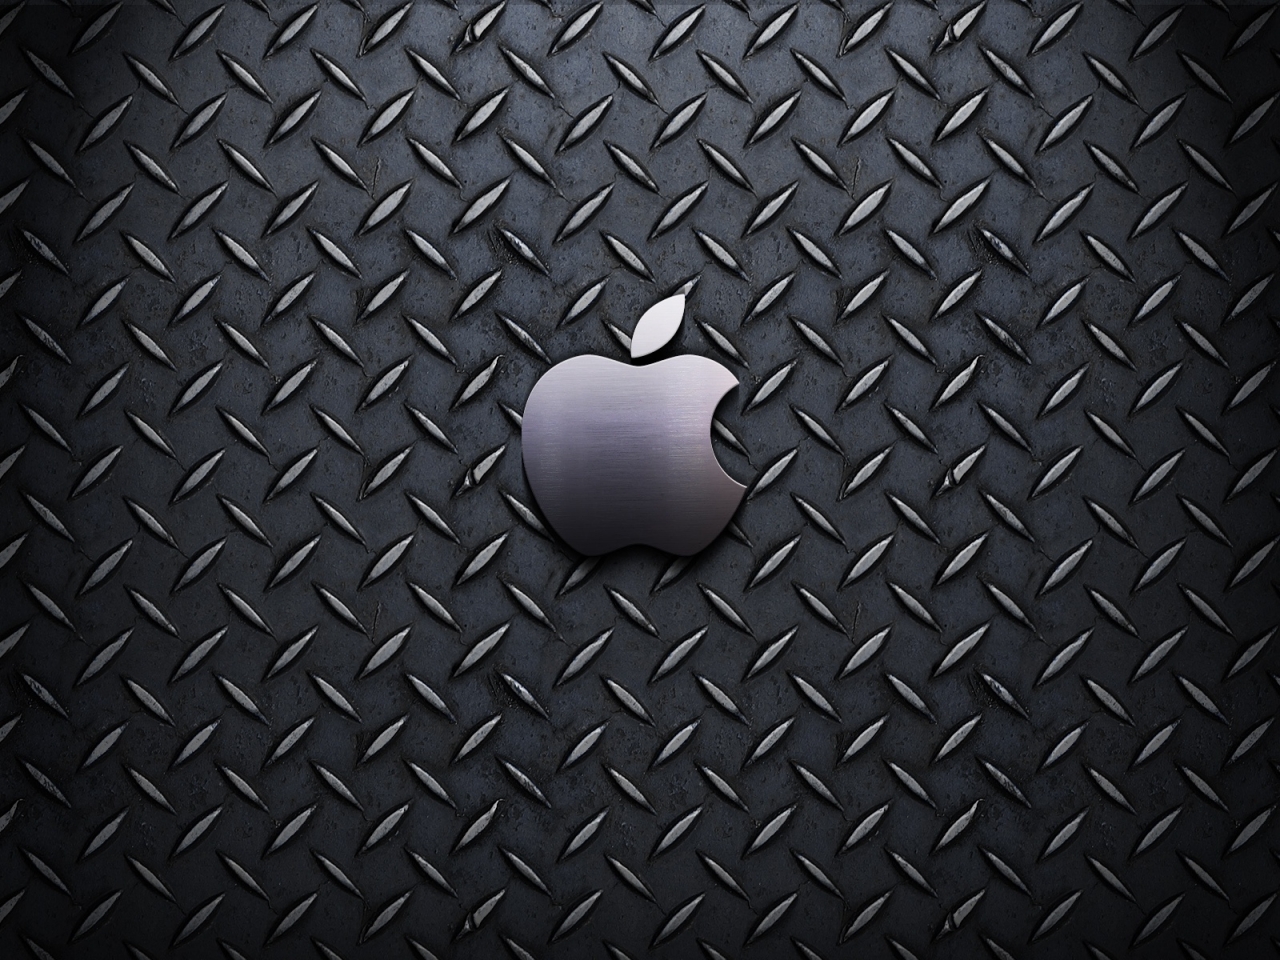 Industrial Apple for 1280 x 960 resolution